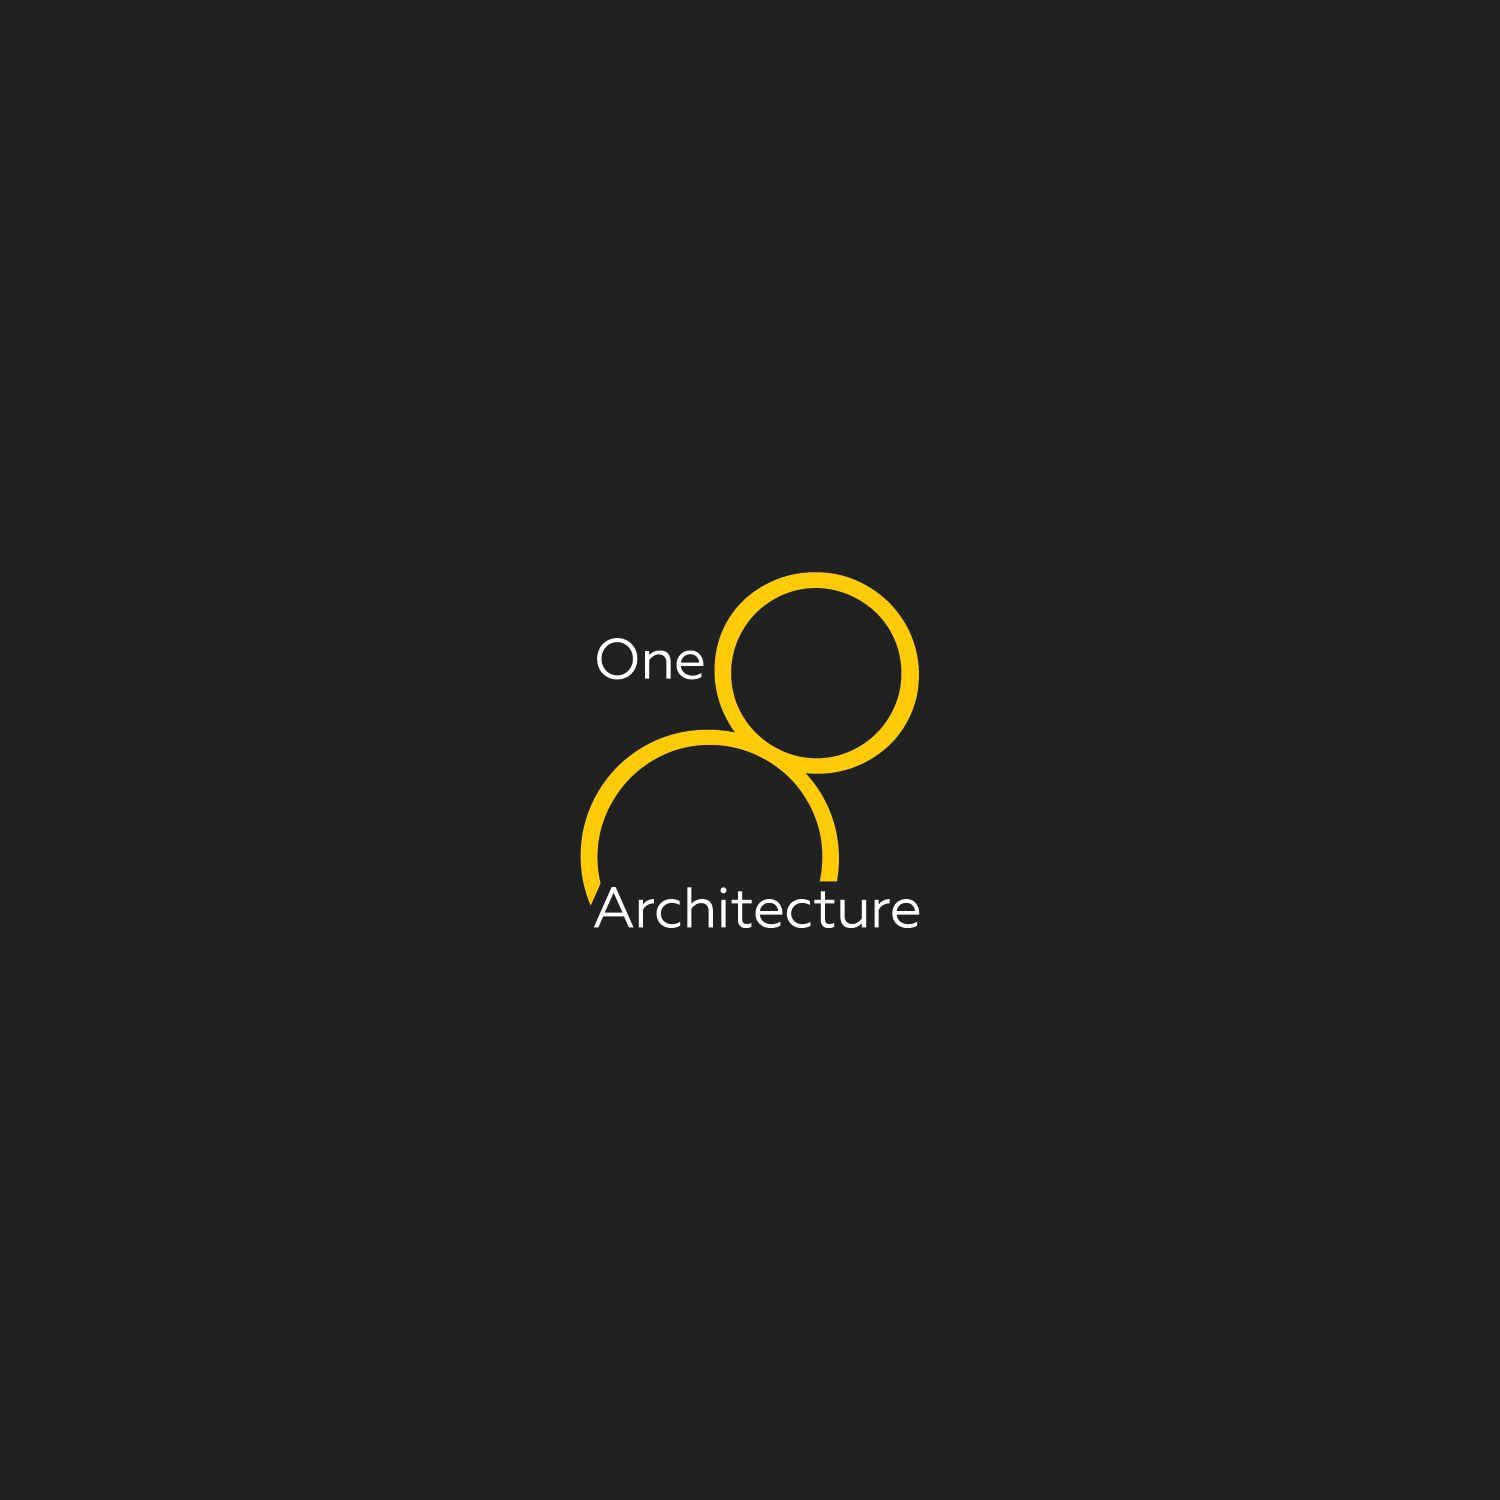 Eight Logo - Modern, Professional, Architecture Logo Design for Architecture One